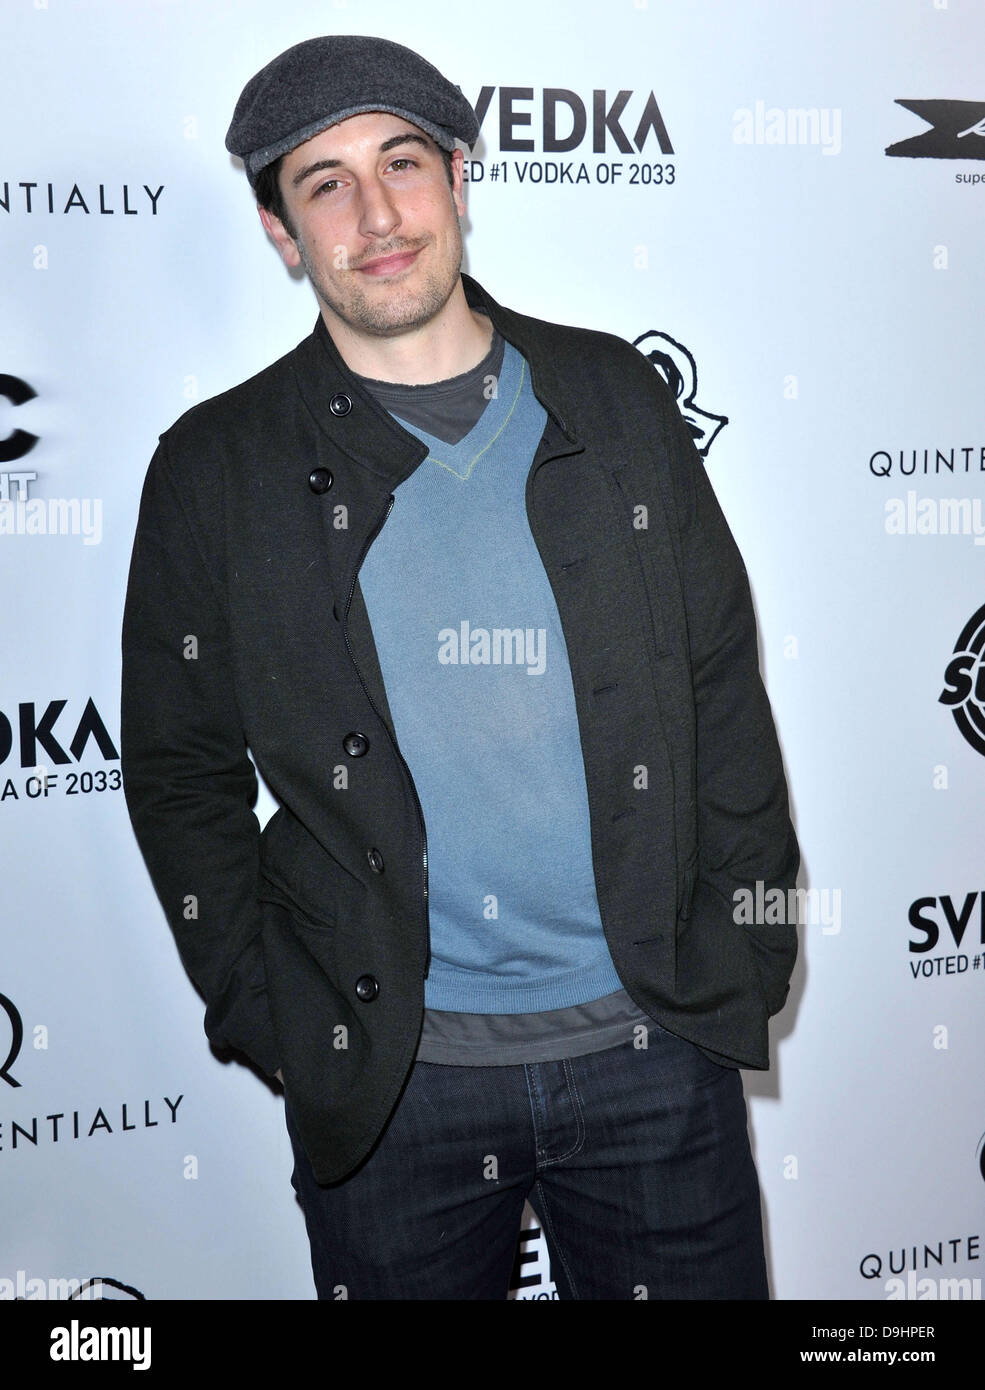 Jason Biggs Los Angeles premiere of 'Super' held at The Egyptian Theatre - Arrivals Los Angeles, California - 21.03.11 Stock Photo